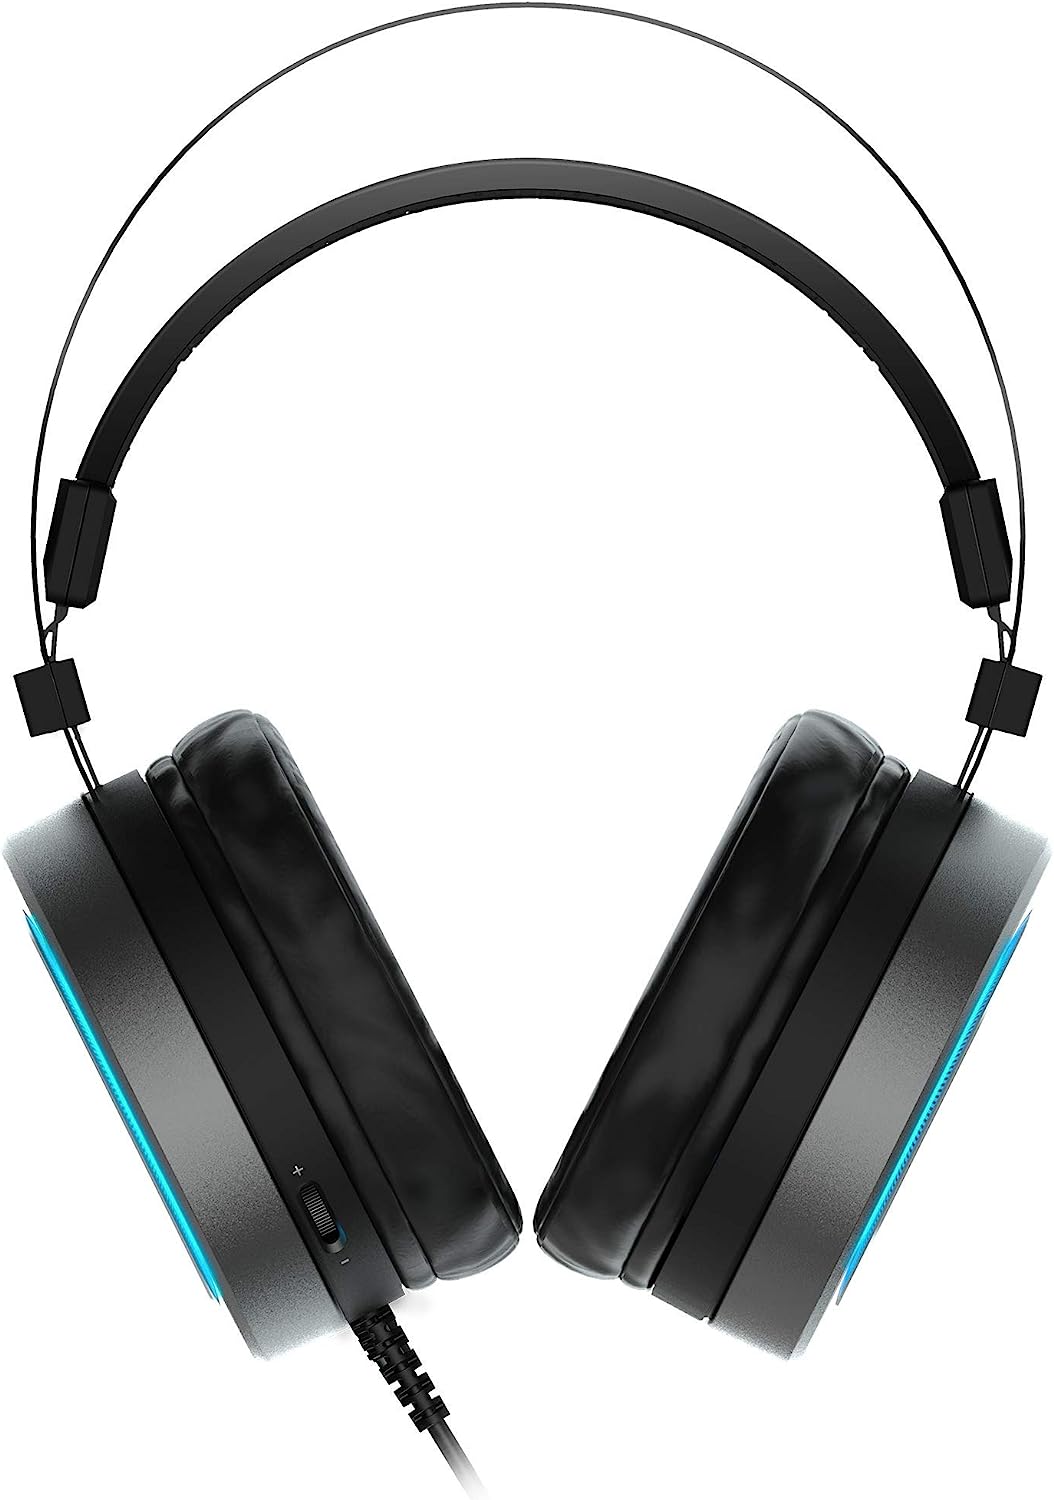 Rapoo Vpro Gaming Headset in Bahrain - Best Gaming Accessories